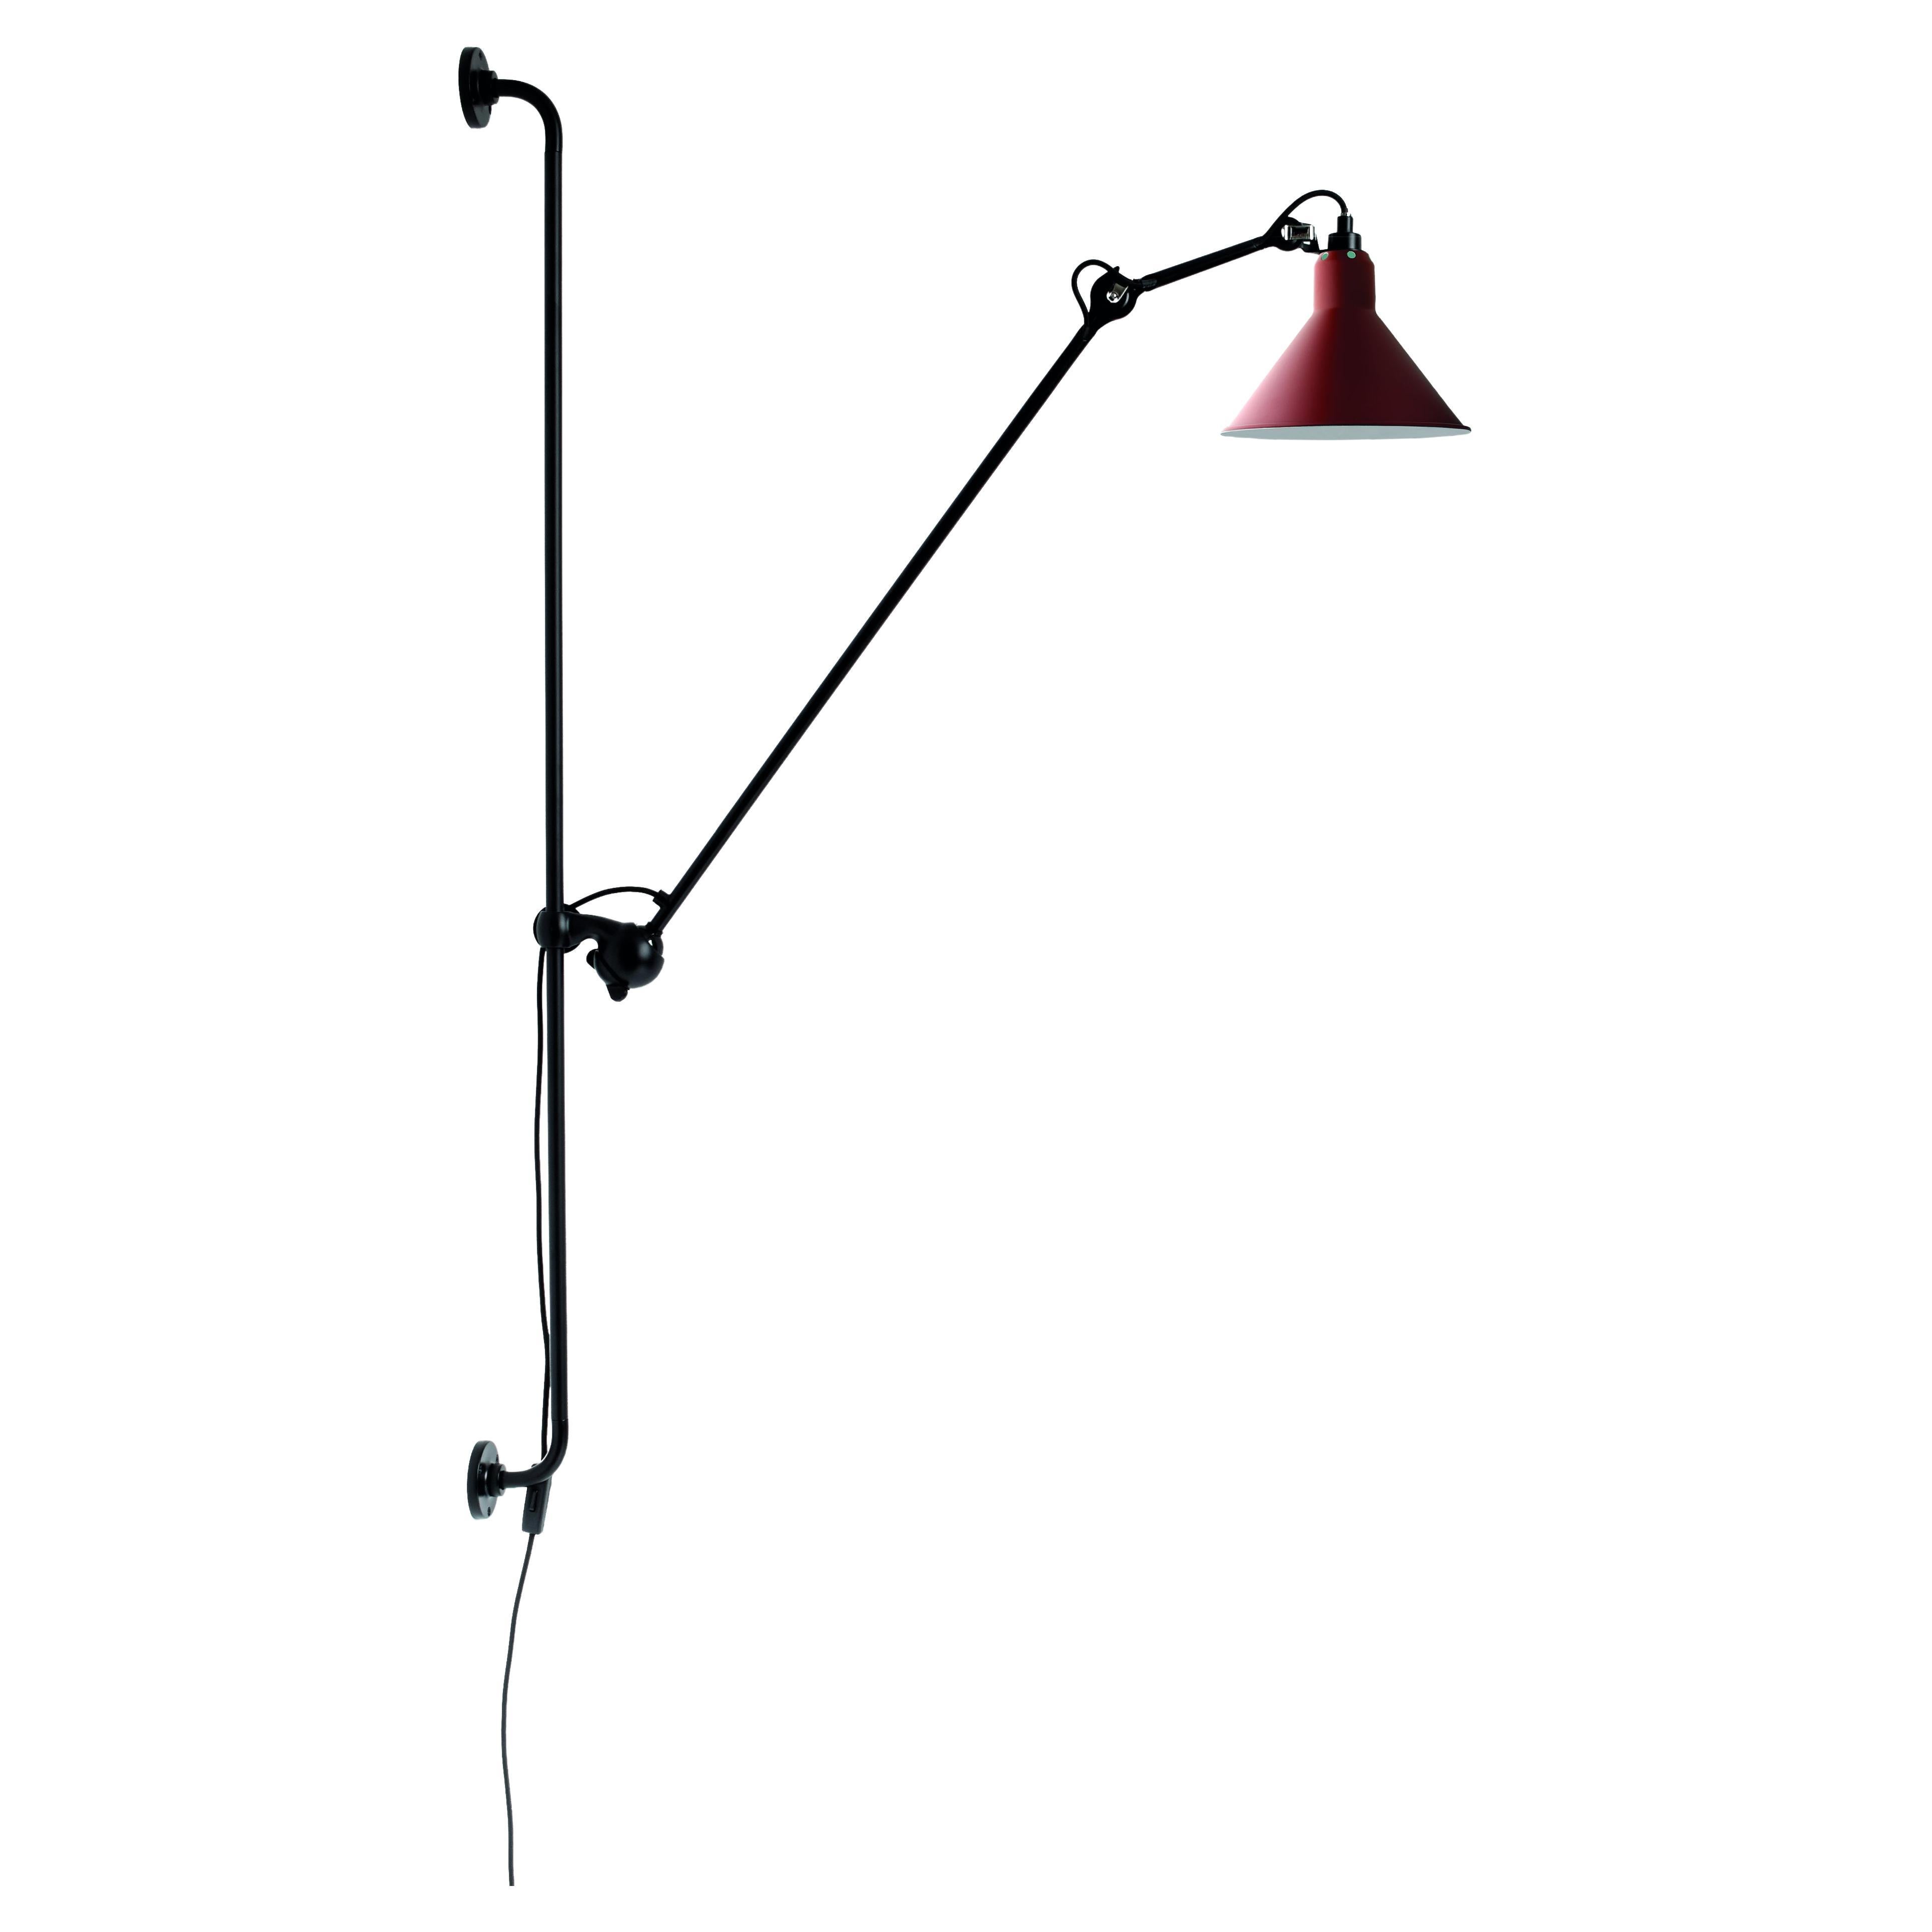 DCW Editions La Lampe Gras N°214 Conic Wall Lamp in Black Arm & Red Shade